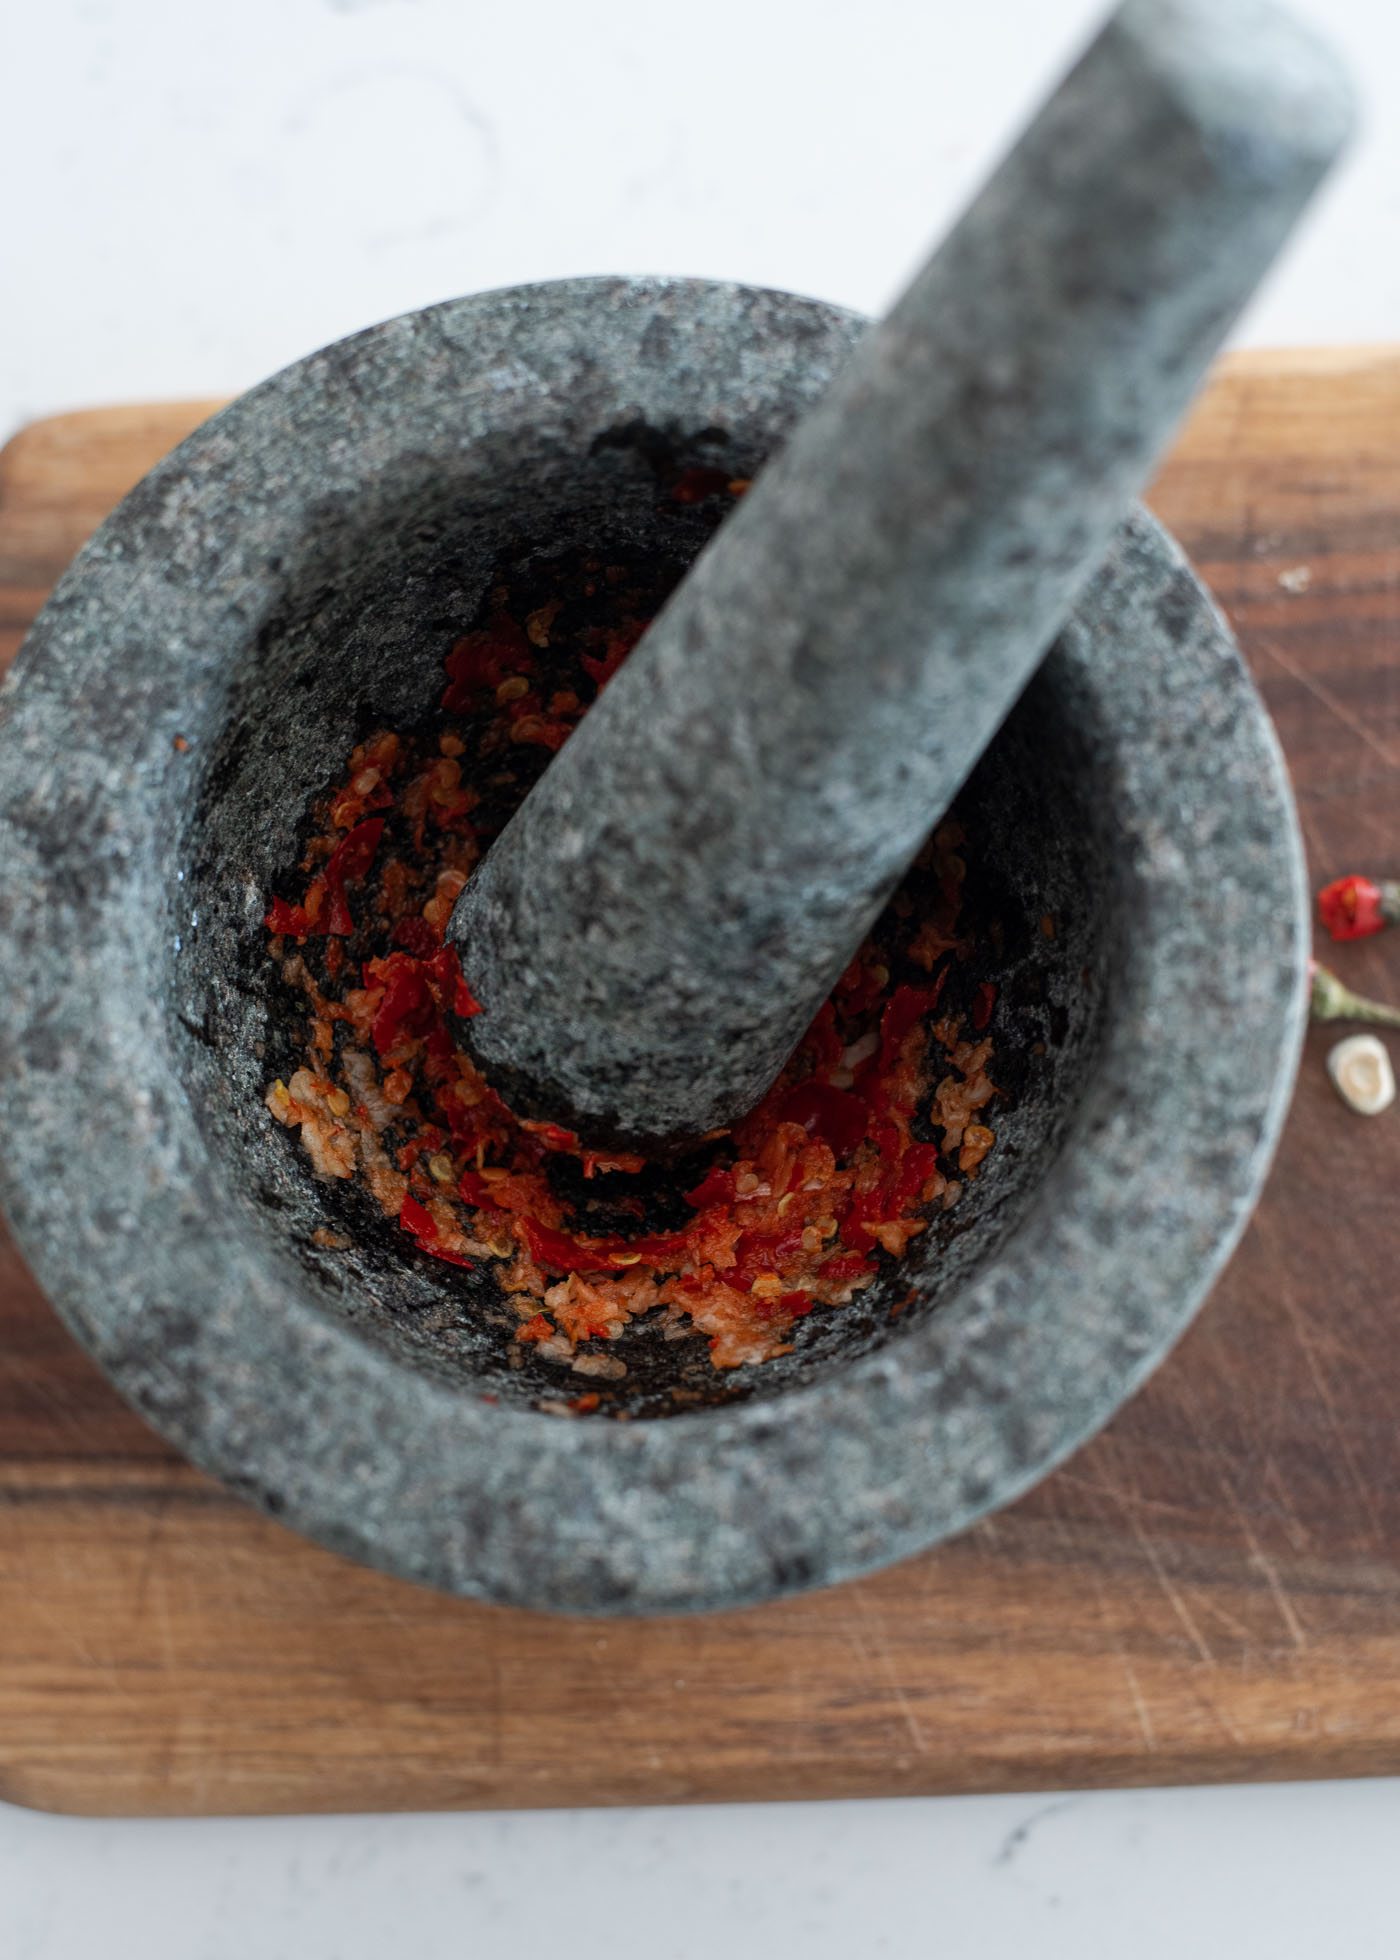 Red chili and garlic is pounded in a mortar with a pestle.